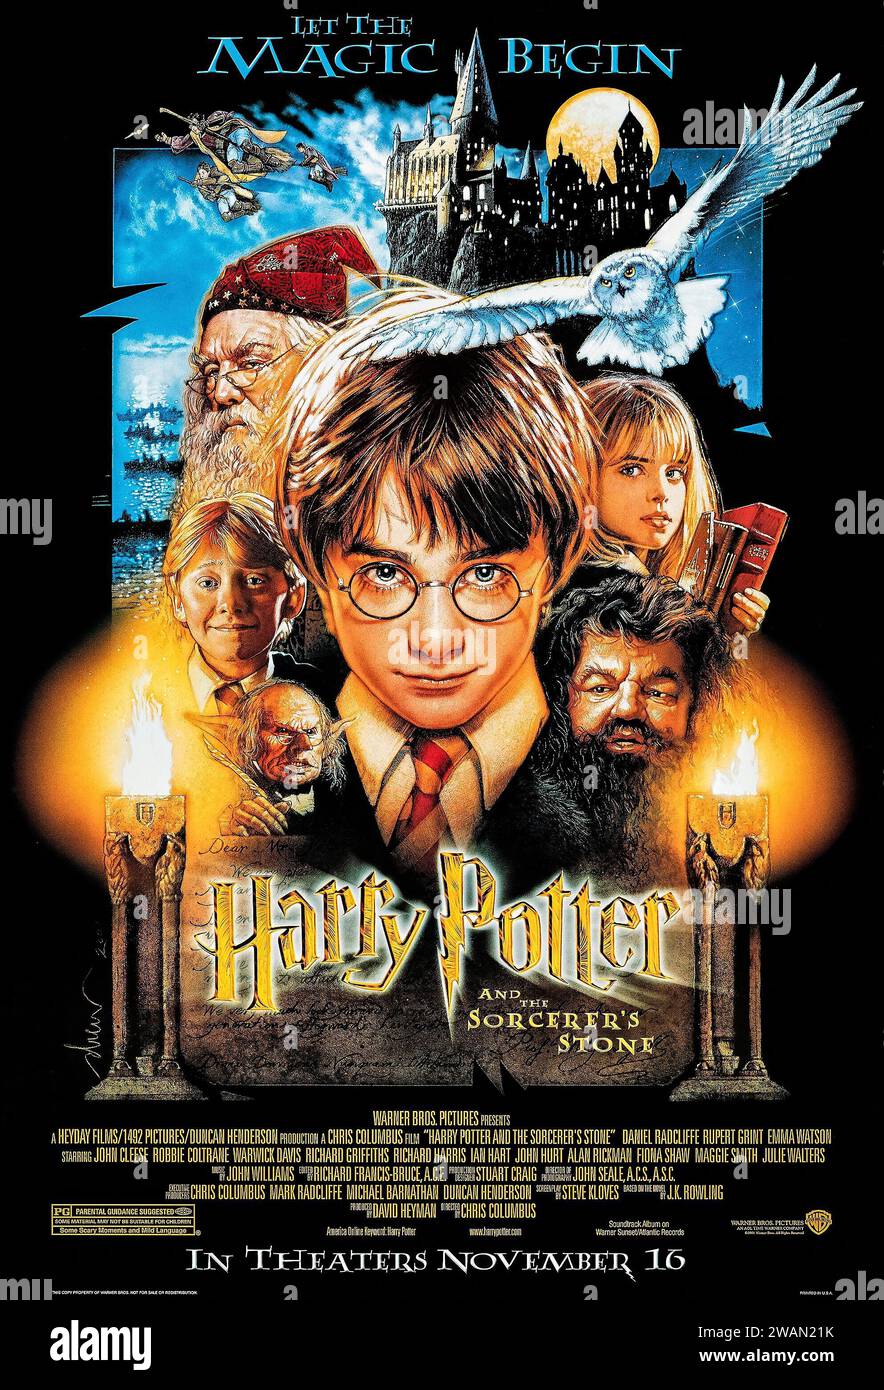 Harry Potter and the Sorcerer's Stone (2001) directed by Chris Columbus and starring Daniel Radcliffe, Emma Watson, Rupert Grint and Richard Harris. An orphaned boy enrolls in a school of wizardry, where he learns the truth about himself, his family and the terrible evil that haunts the magical world. Photograph of an original 2001 US one sheet poster. ***EDITORIAL USE ONLY*** Credit: BFA / Warner Bros Stock Photo